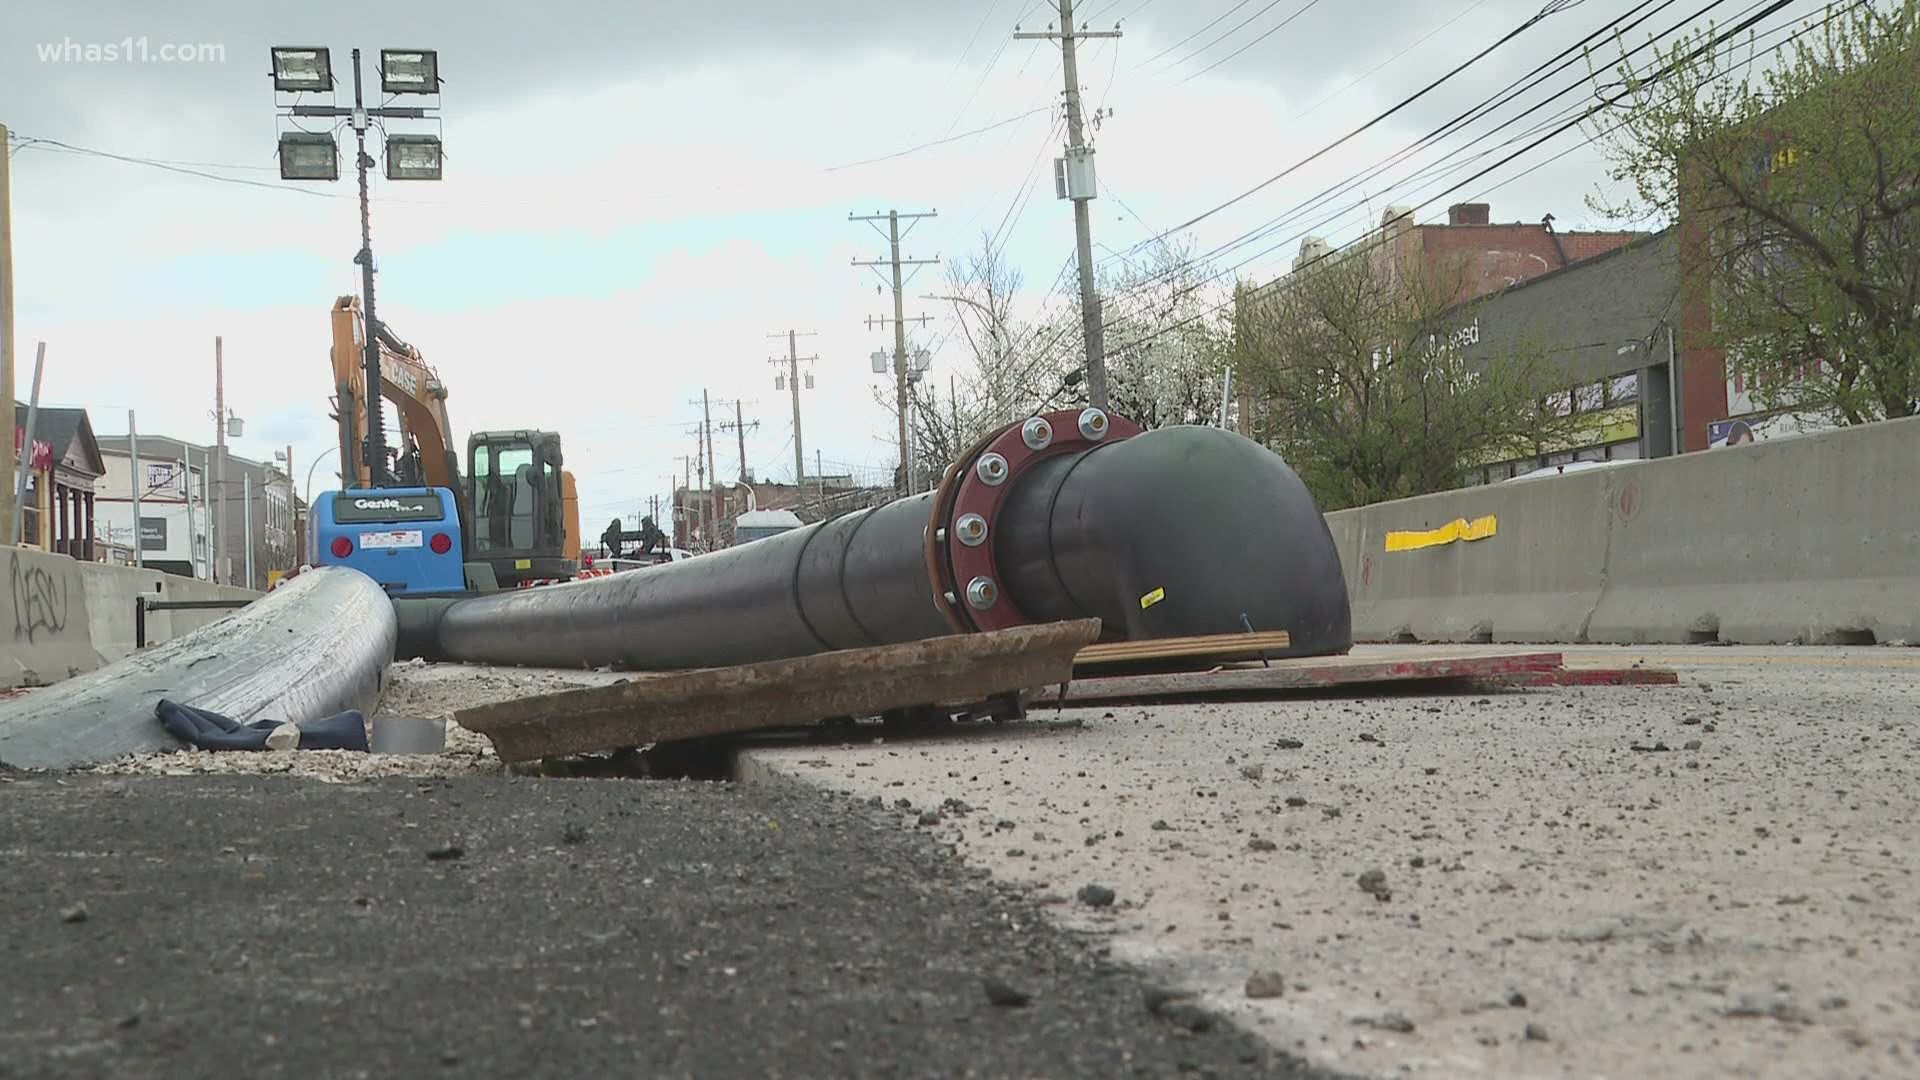 MSD is working to repair a portion of a 155-year-old sewer pipe under Broadway in downtown Louisville.